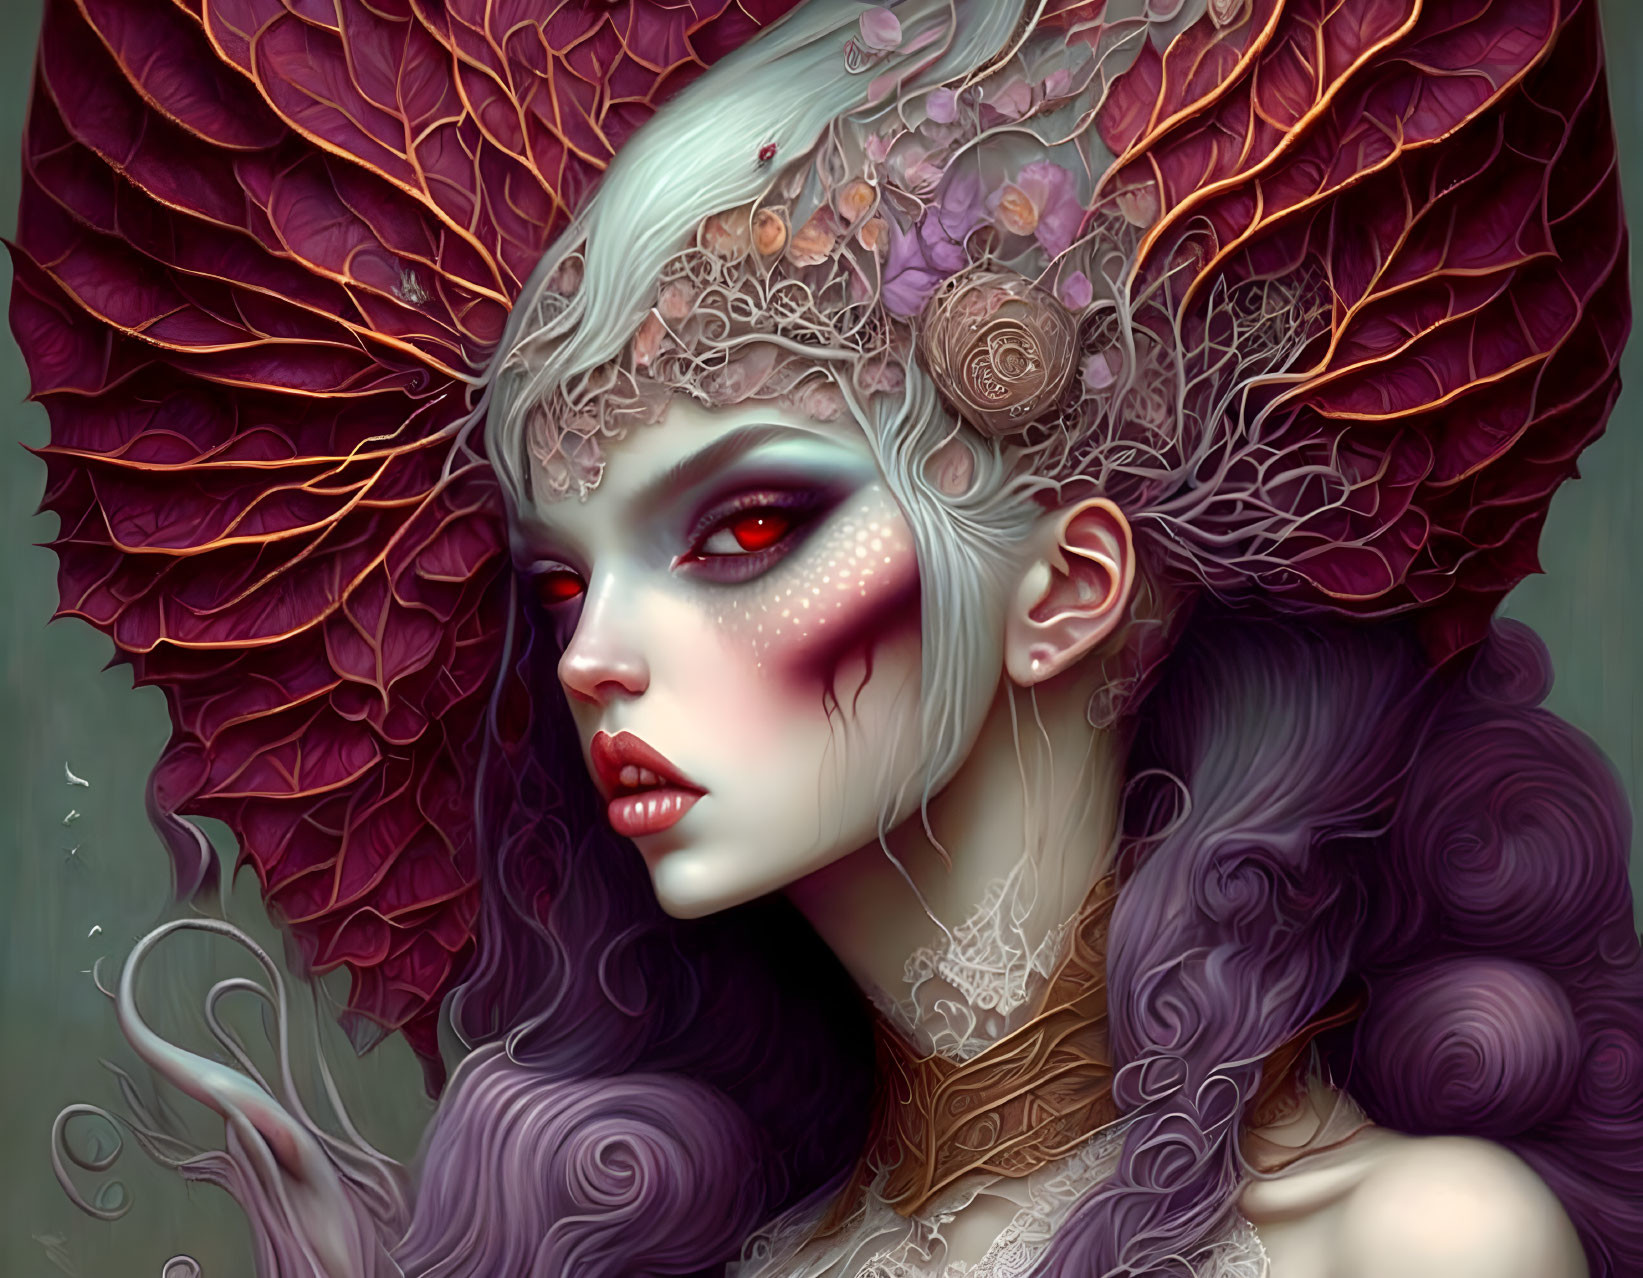 Fantasy female figure with intricate headpiece and purple hair on moody backdrop